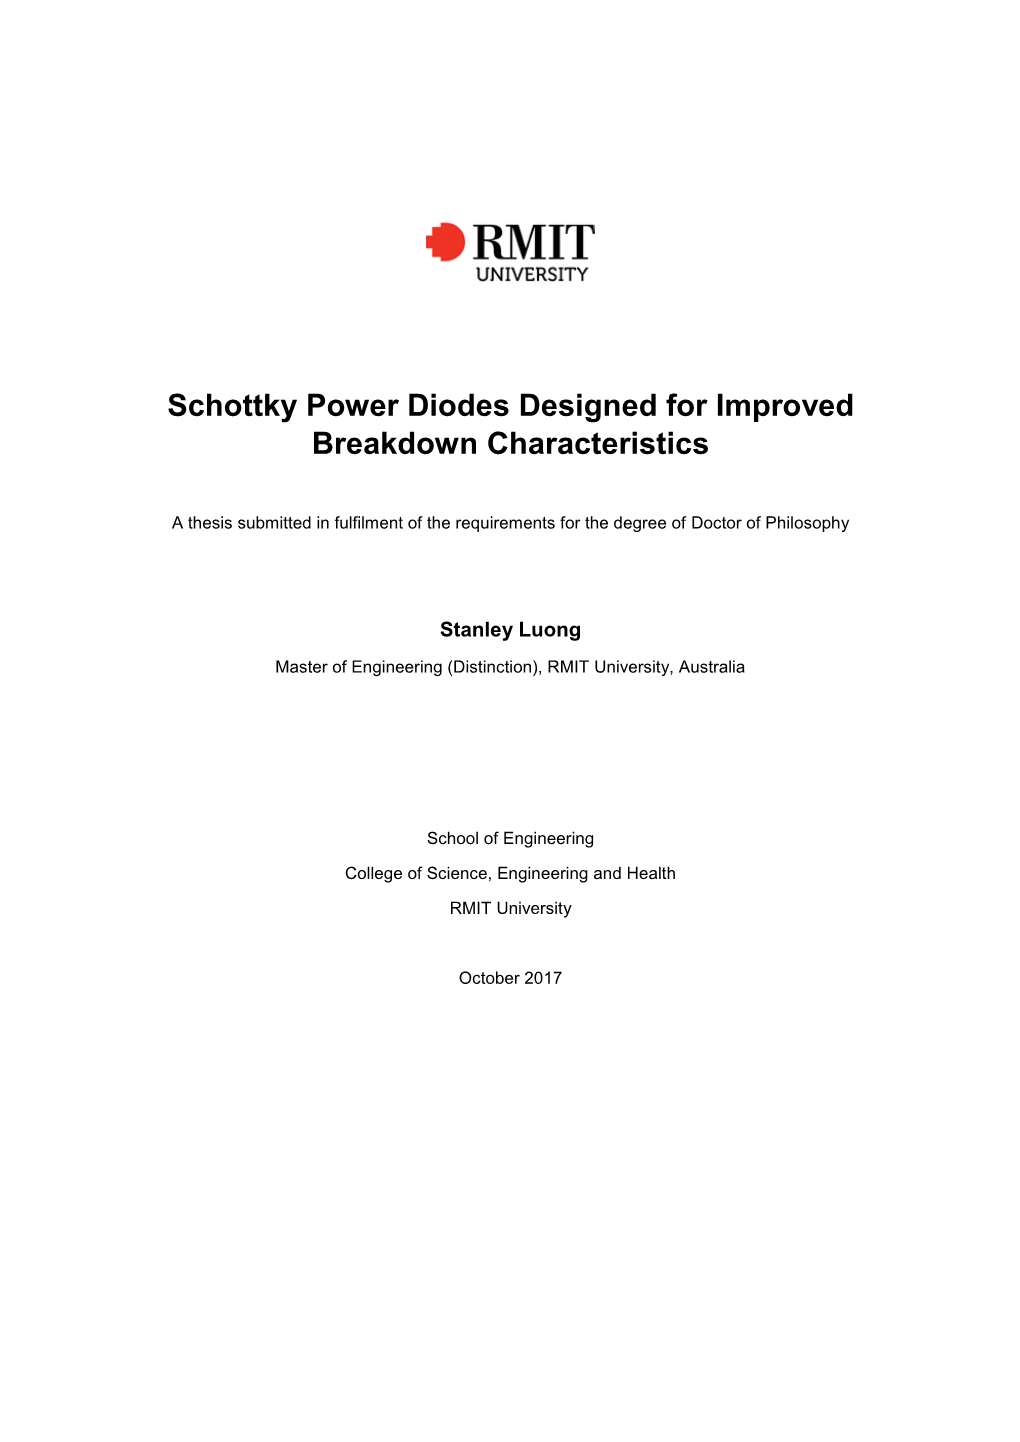 Schottky Power Diodes Designed for Improved Breakdown Characteristics